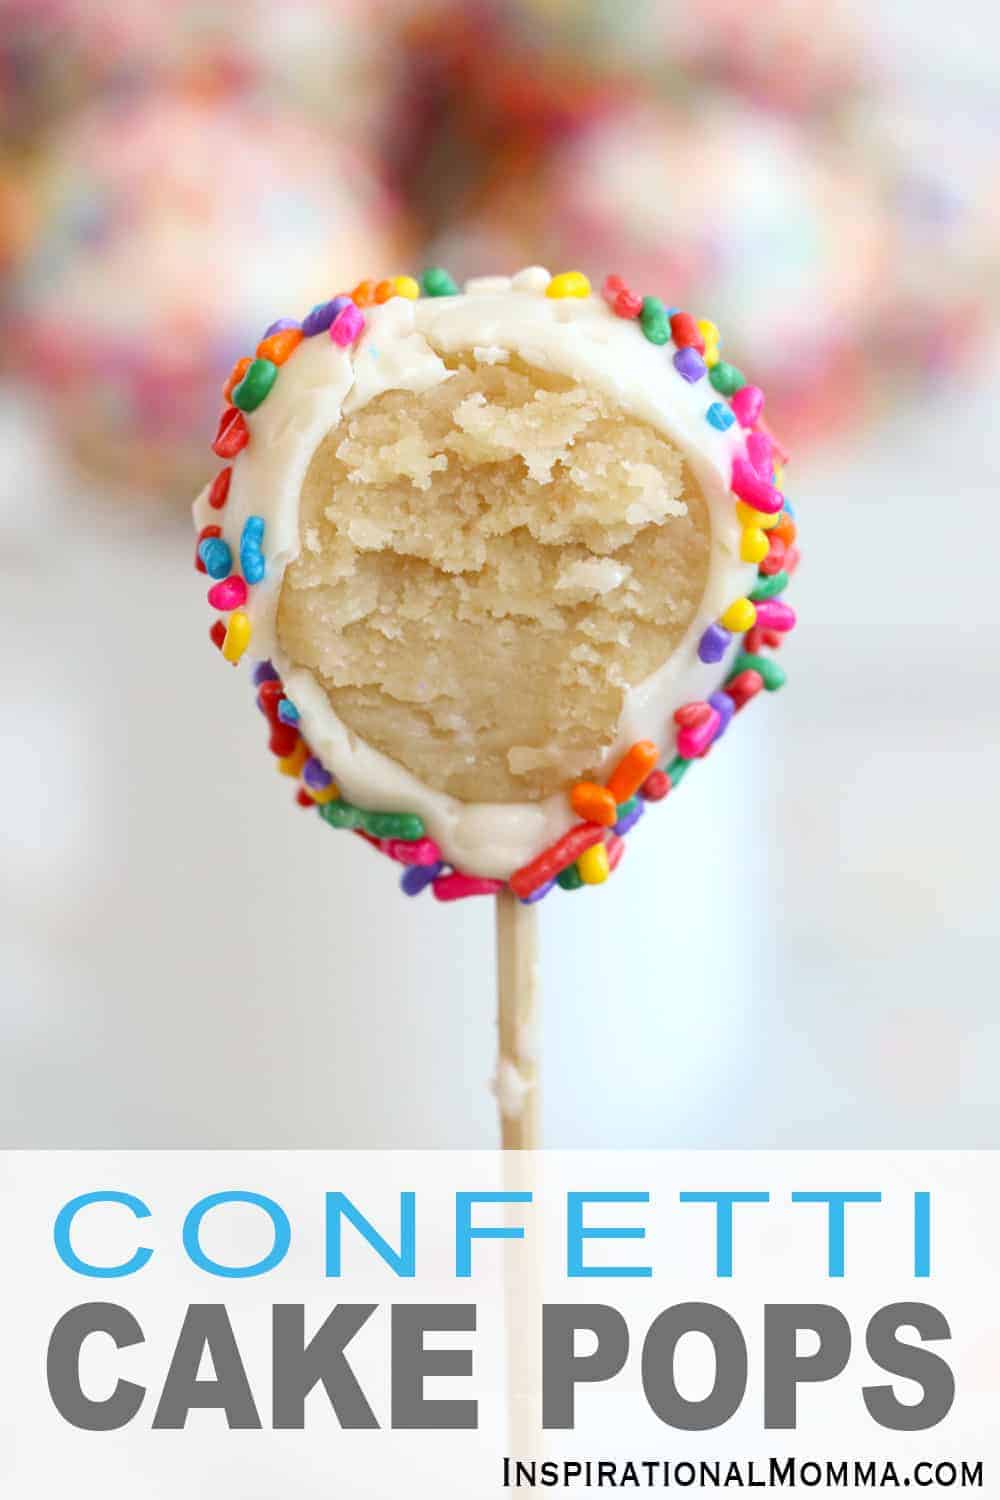 Make every day a celebration with this quick, easy-to-make Confetti Cake Pop Recipe!  Kids of all ages will love to make these sweet, delicious treats! #inspirationalmomma #cakepops #recipe #recipes #dessert #desserts #cakepoprecipe #confetti